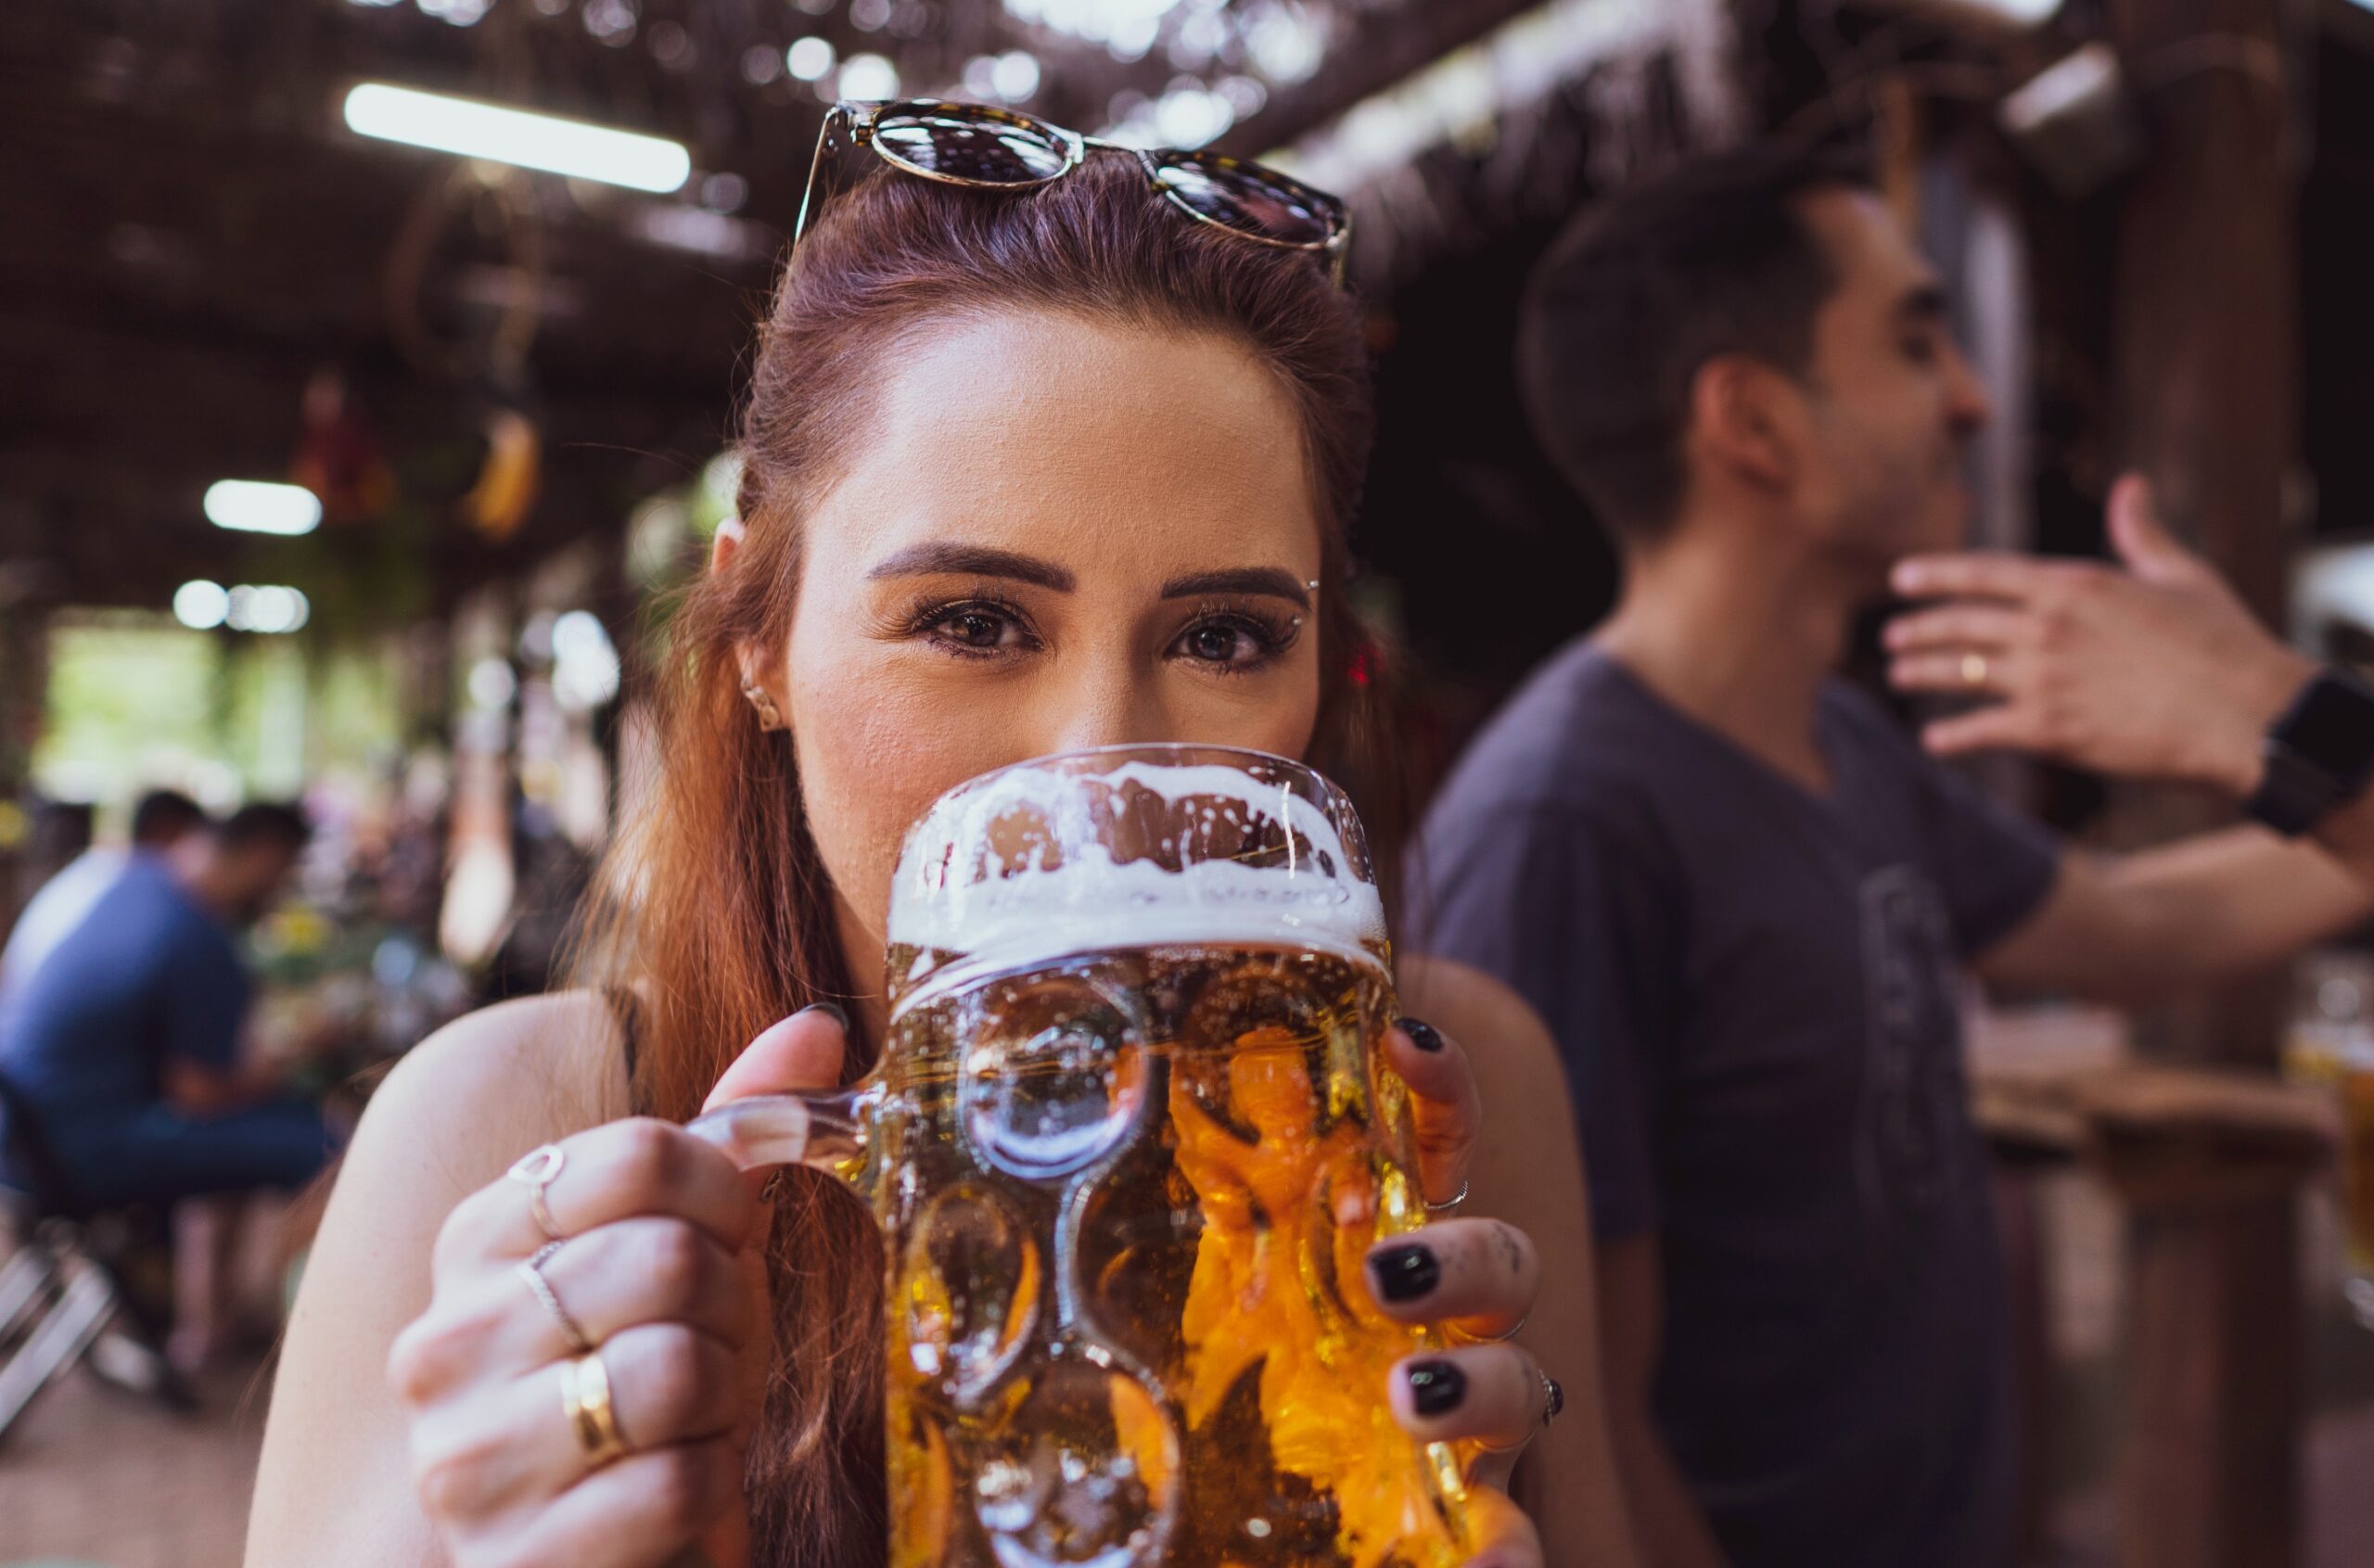 A woman drinking beer from a very large glass mug